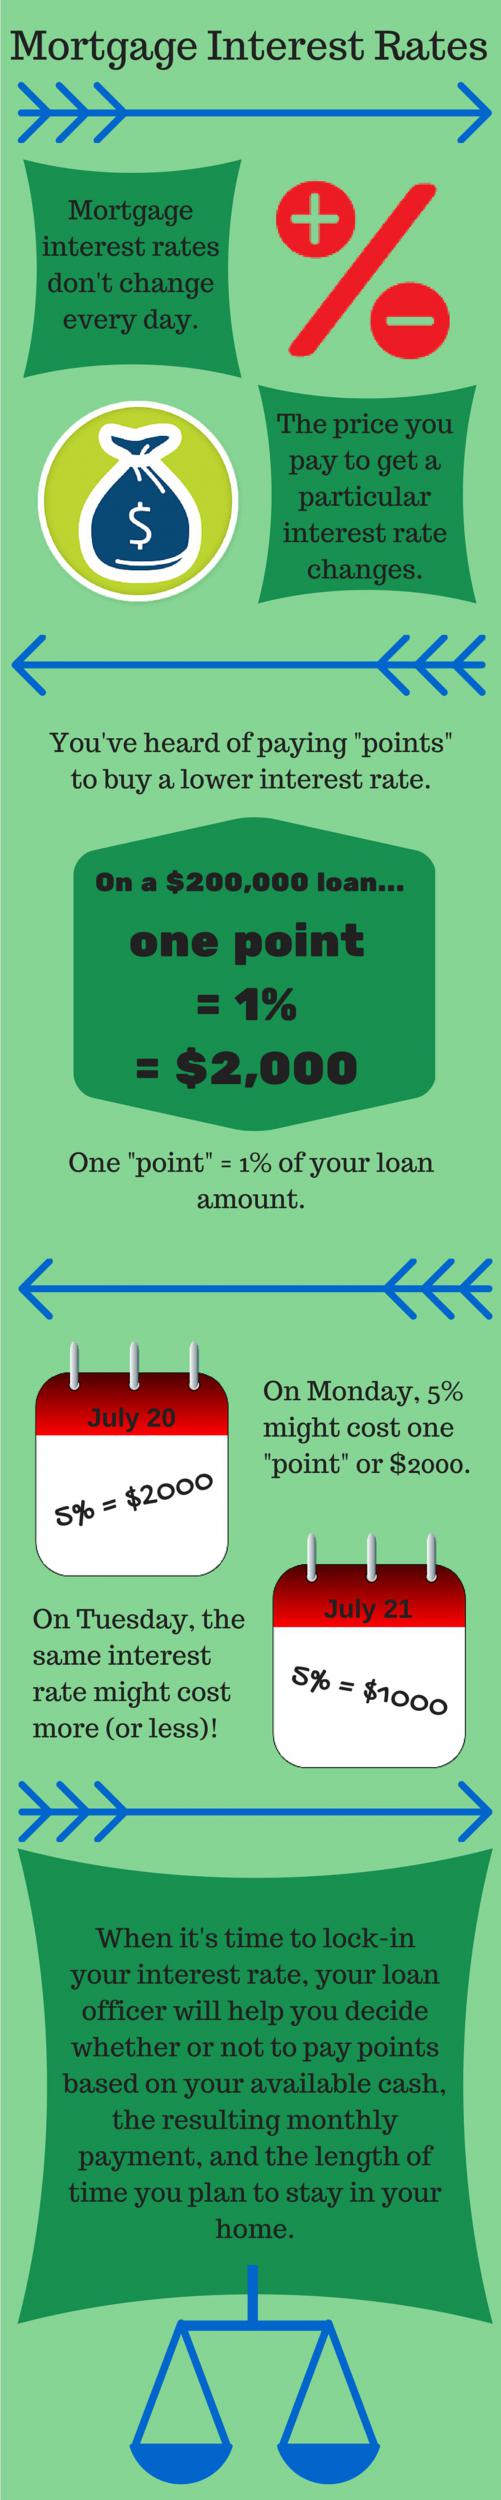 Mortgage Interest Rates Infographic